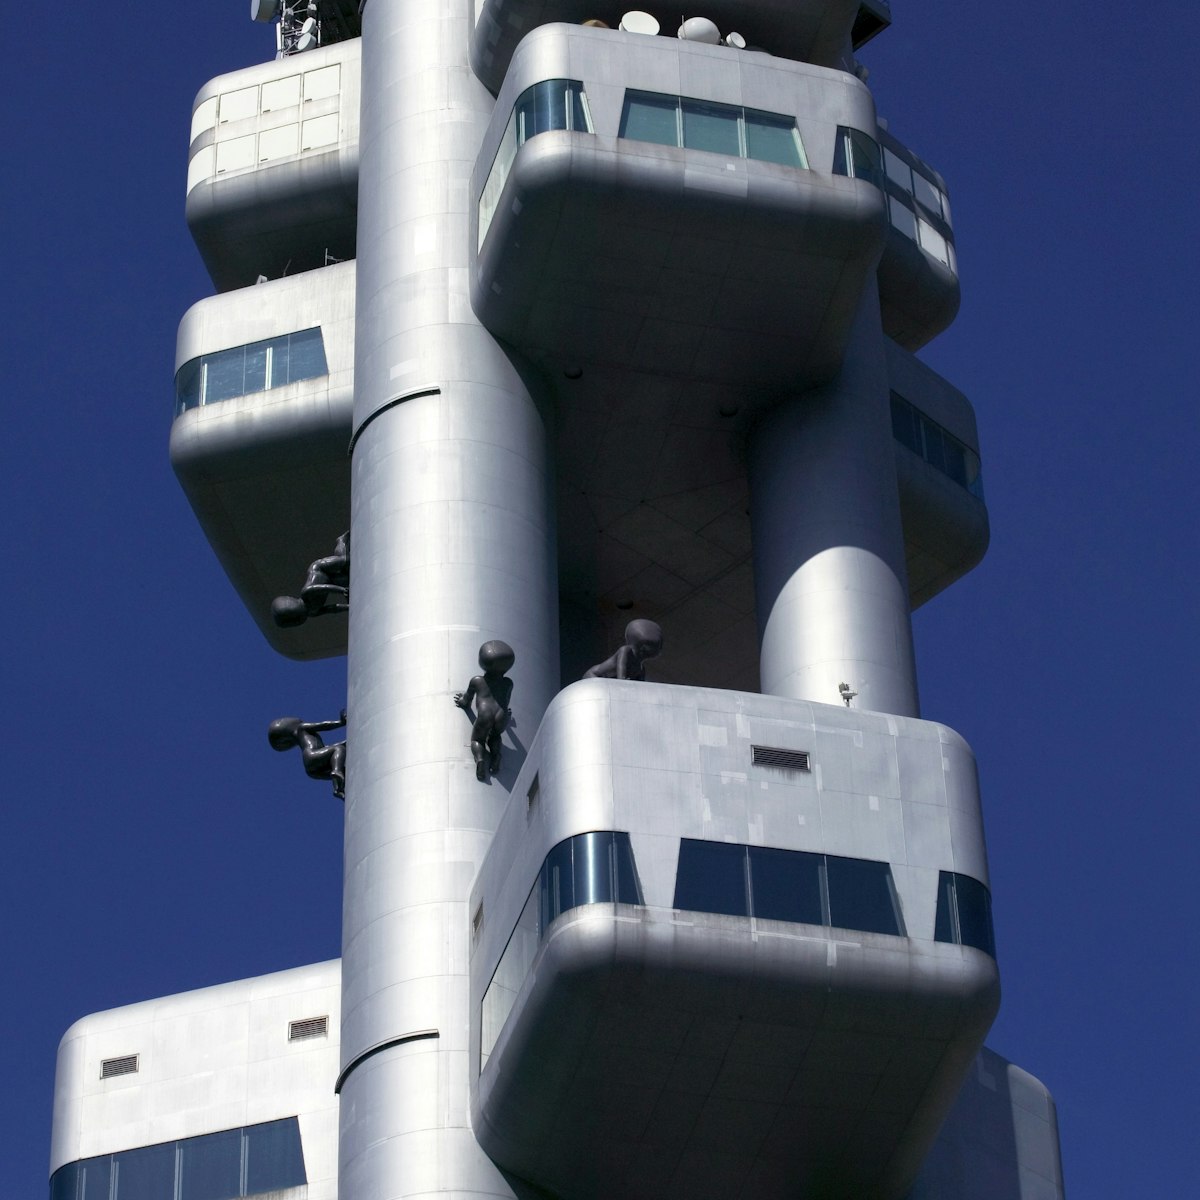 Zizkov TV Tower adorned with crawling baby sculptures.